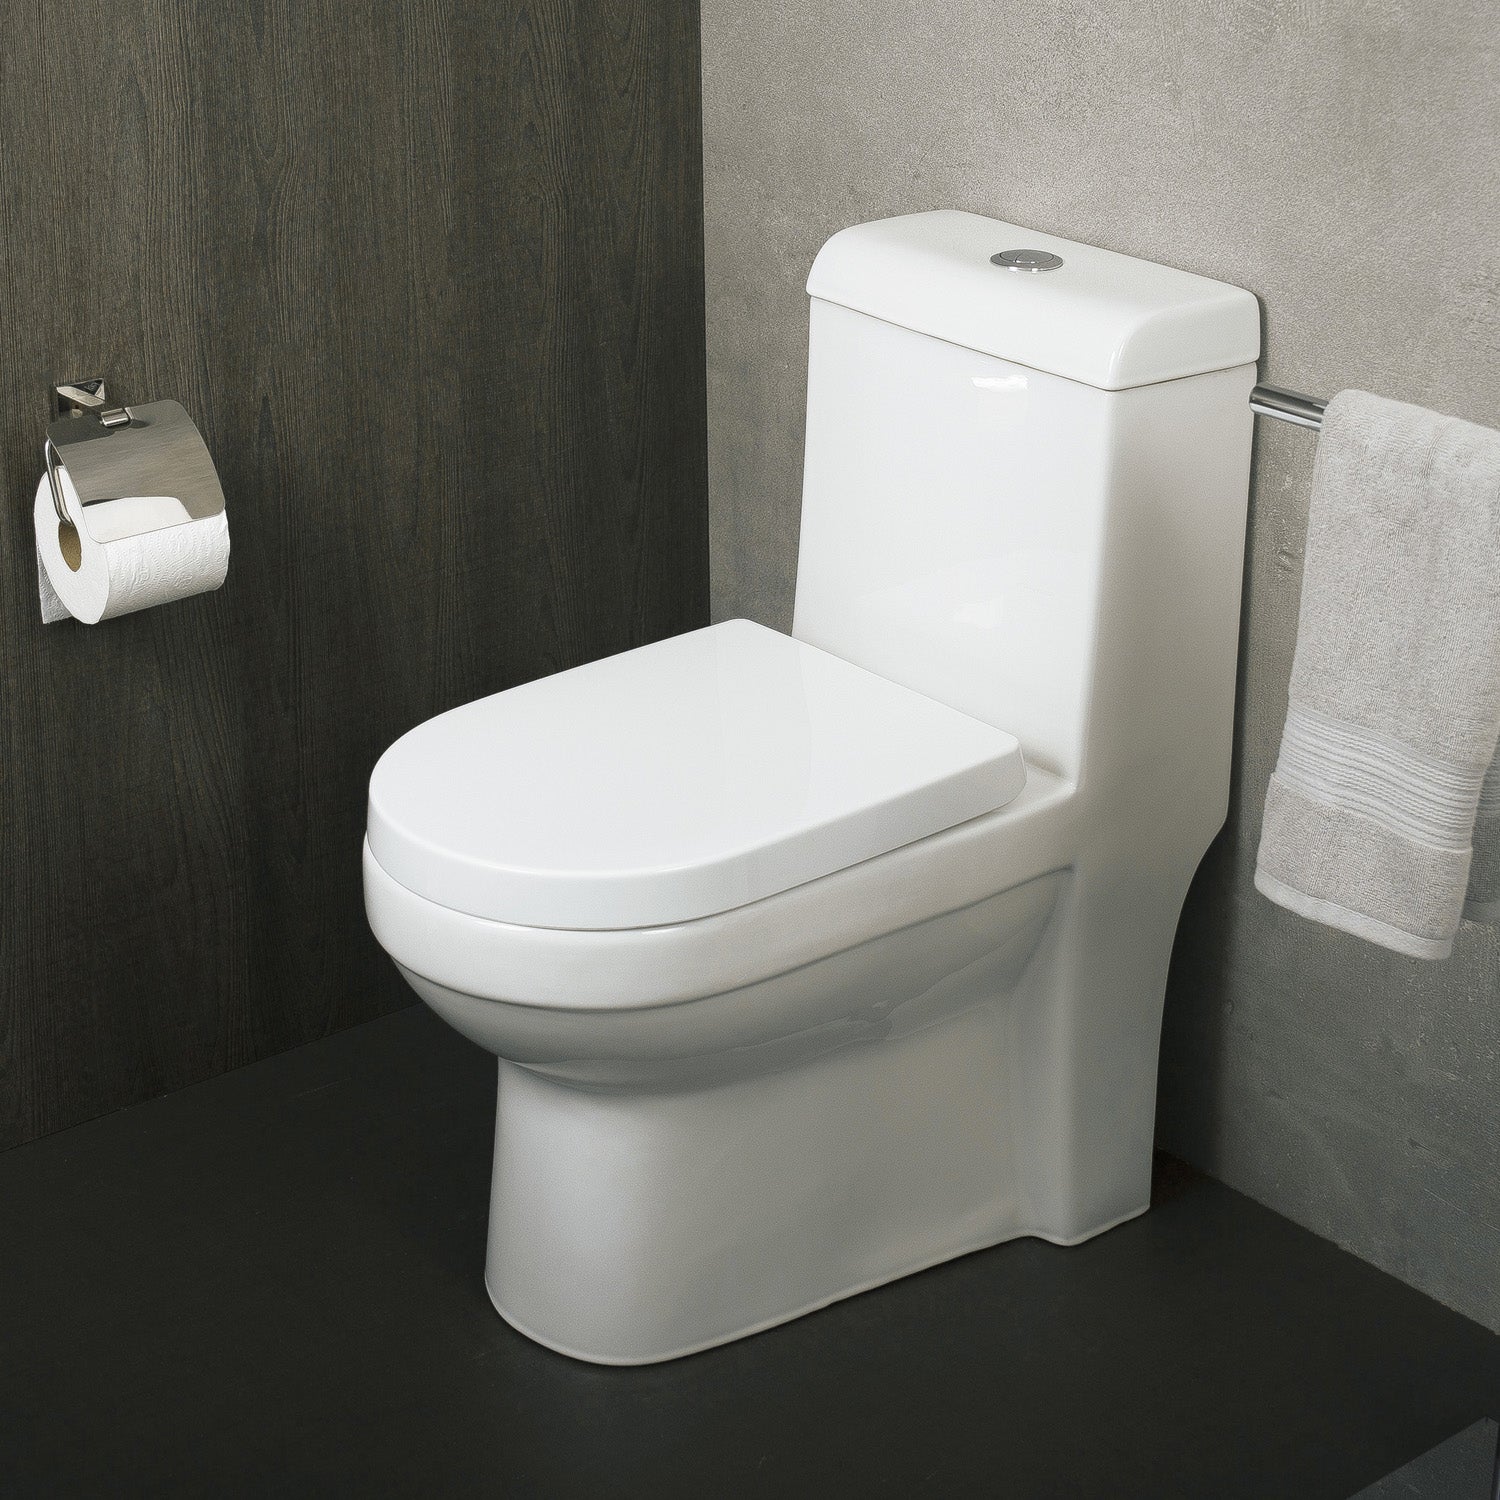 DAX One Piece Square Toilet with Soft Closing Seat and Dual Flush High-Efficiency, Porcelain, White Finish, Height 30-3/4 Inches (BSN-43A)